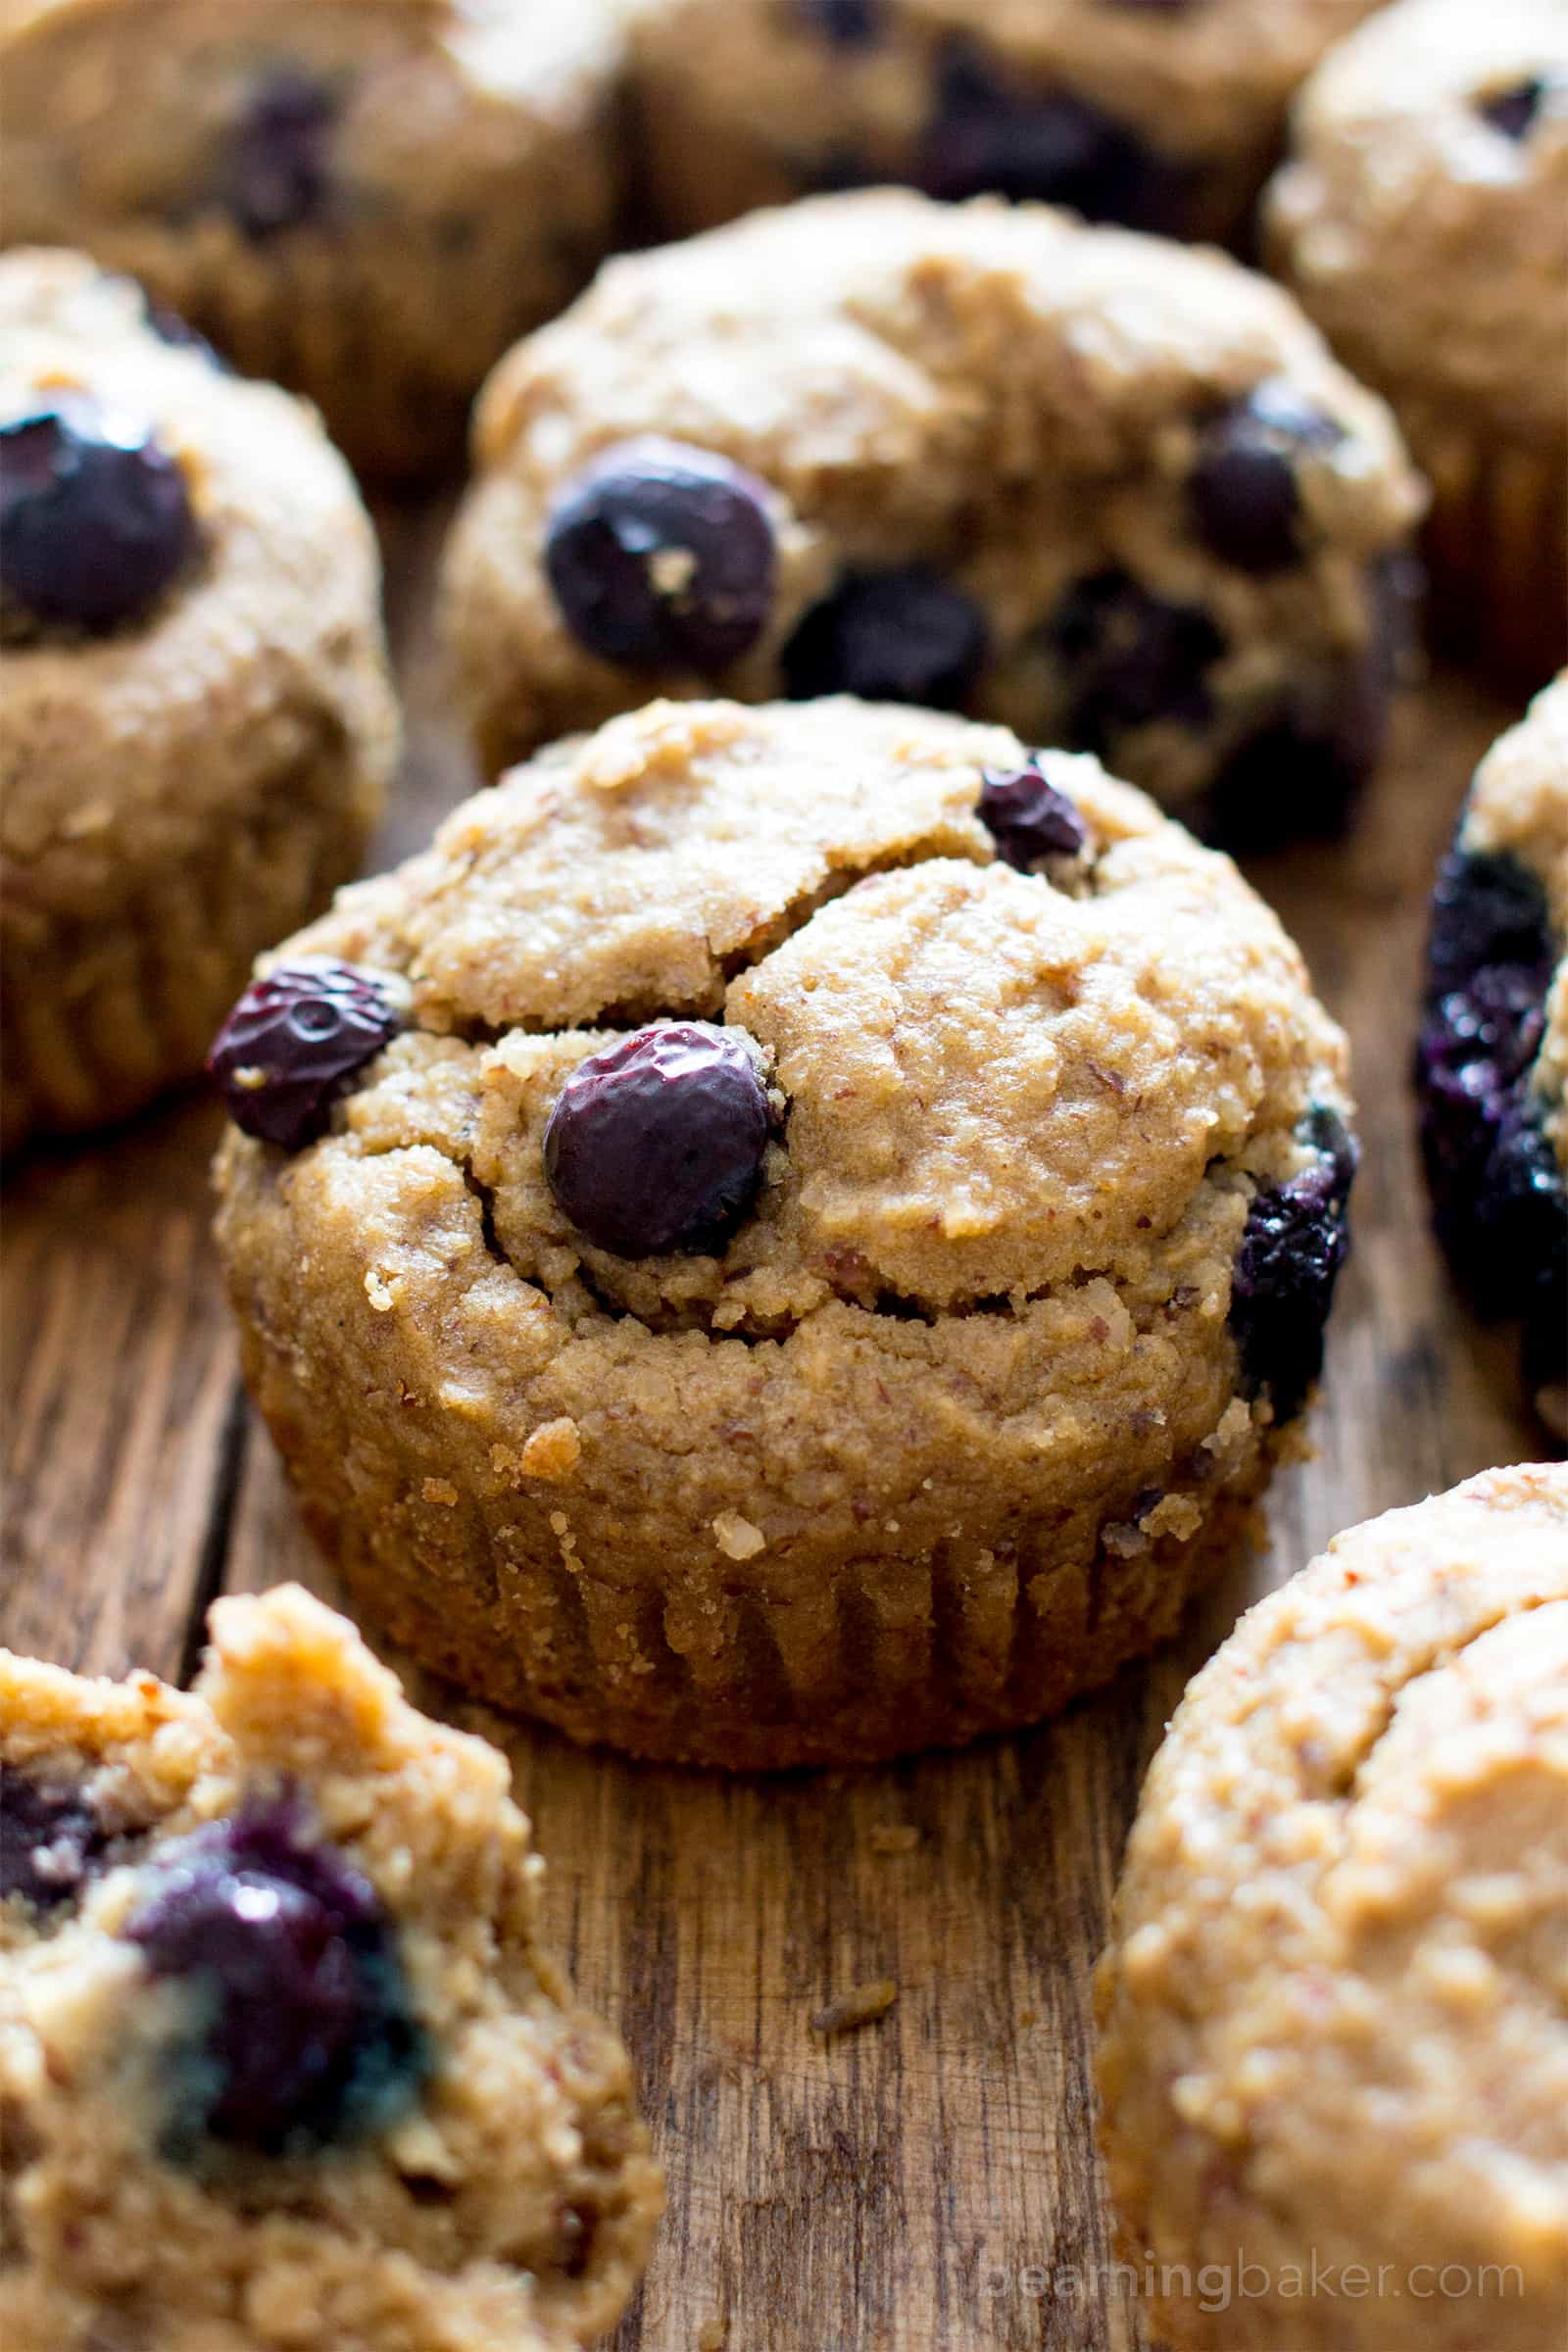 Gluten Free Vegan Blueberry Applesauce Muffins (V, GF): a one bowl recipe for soft & satisfying healthy blueberry muffins made with oat flour and applesauce. #Vegan #GlutenFree #WholeGrain #DairyFree #RefinedSugarFree | BeamingBaker.com